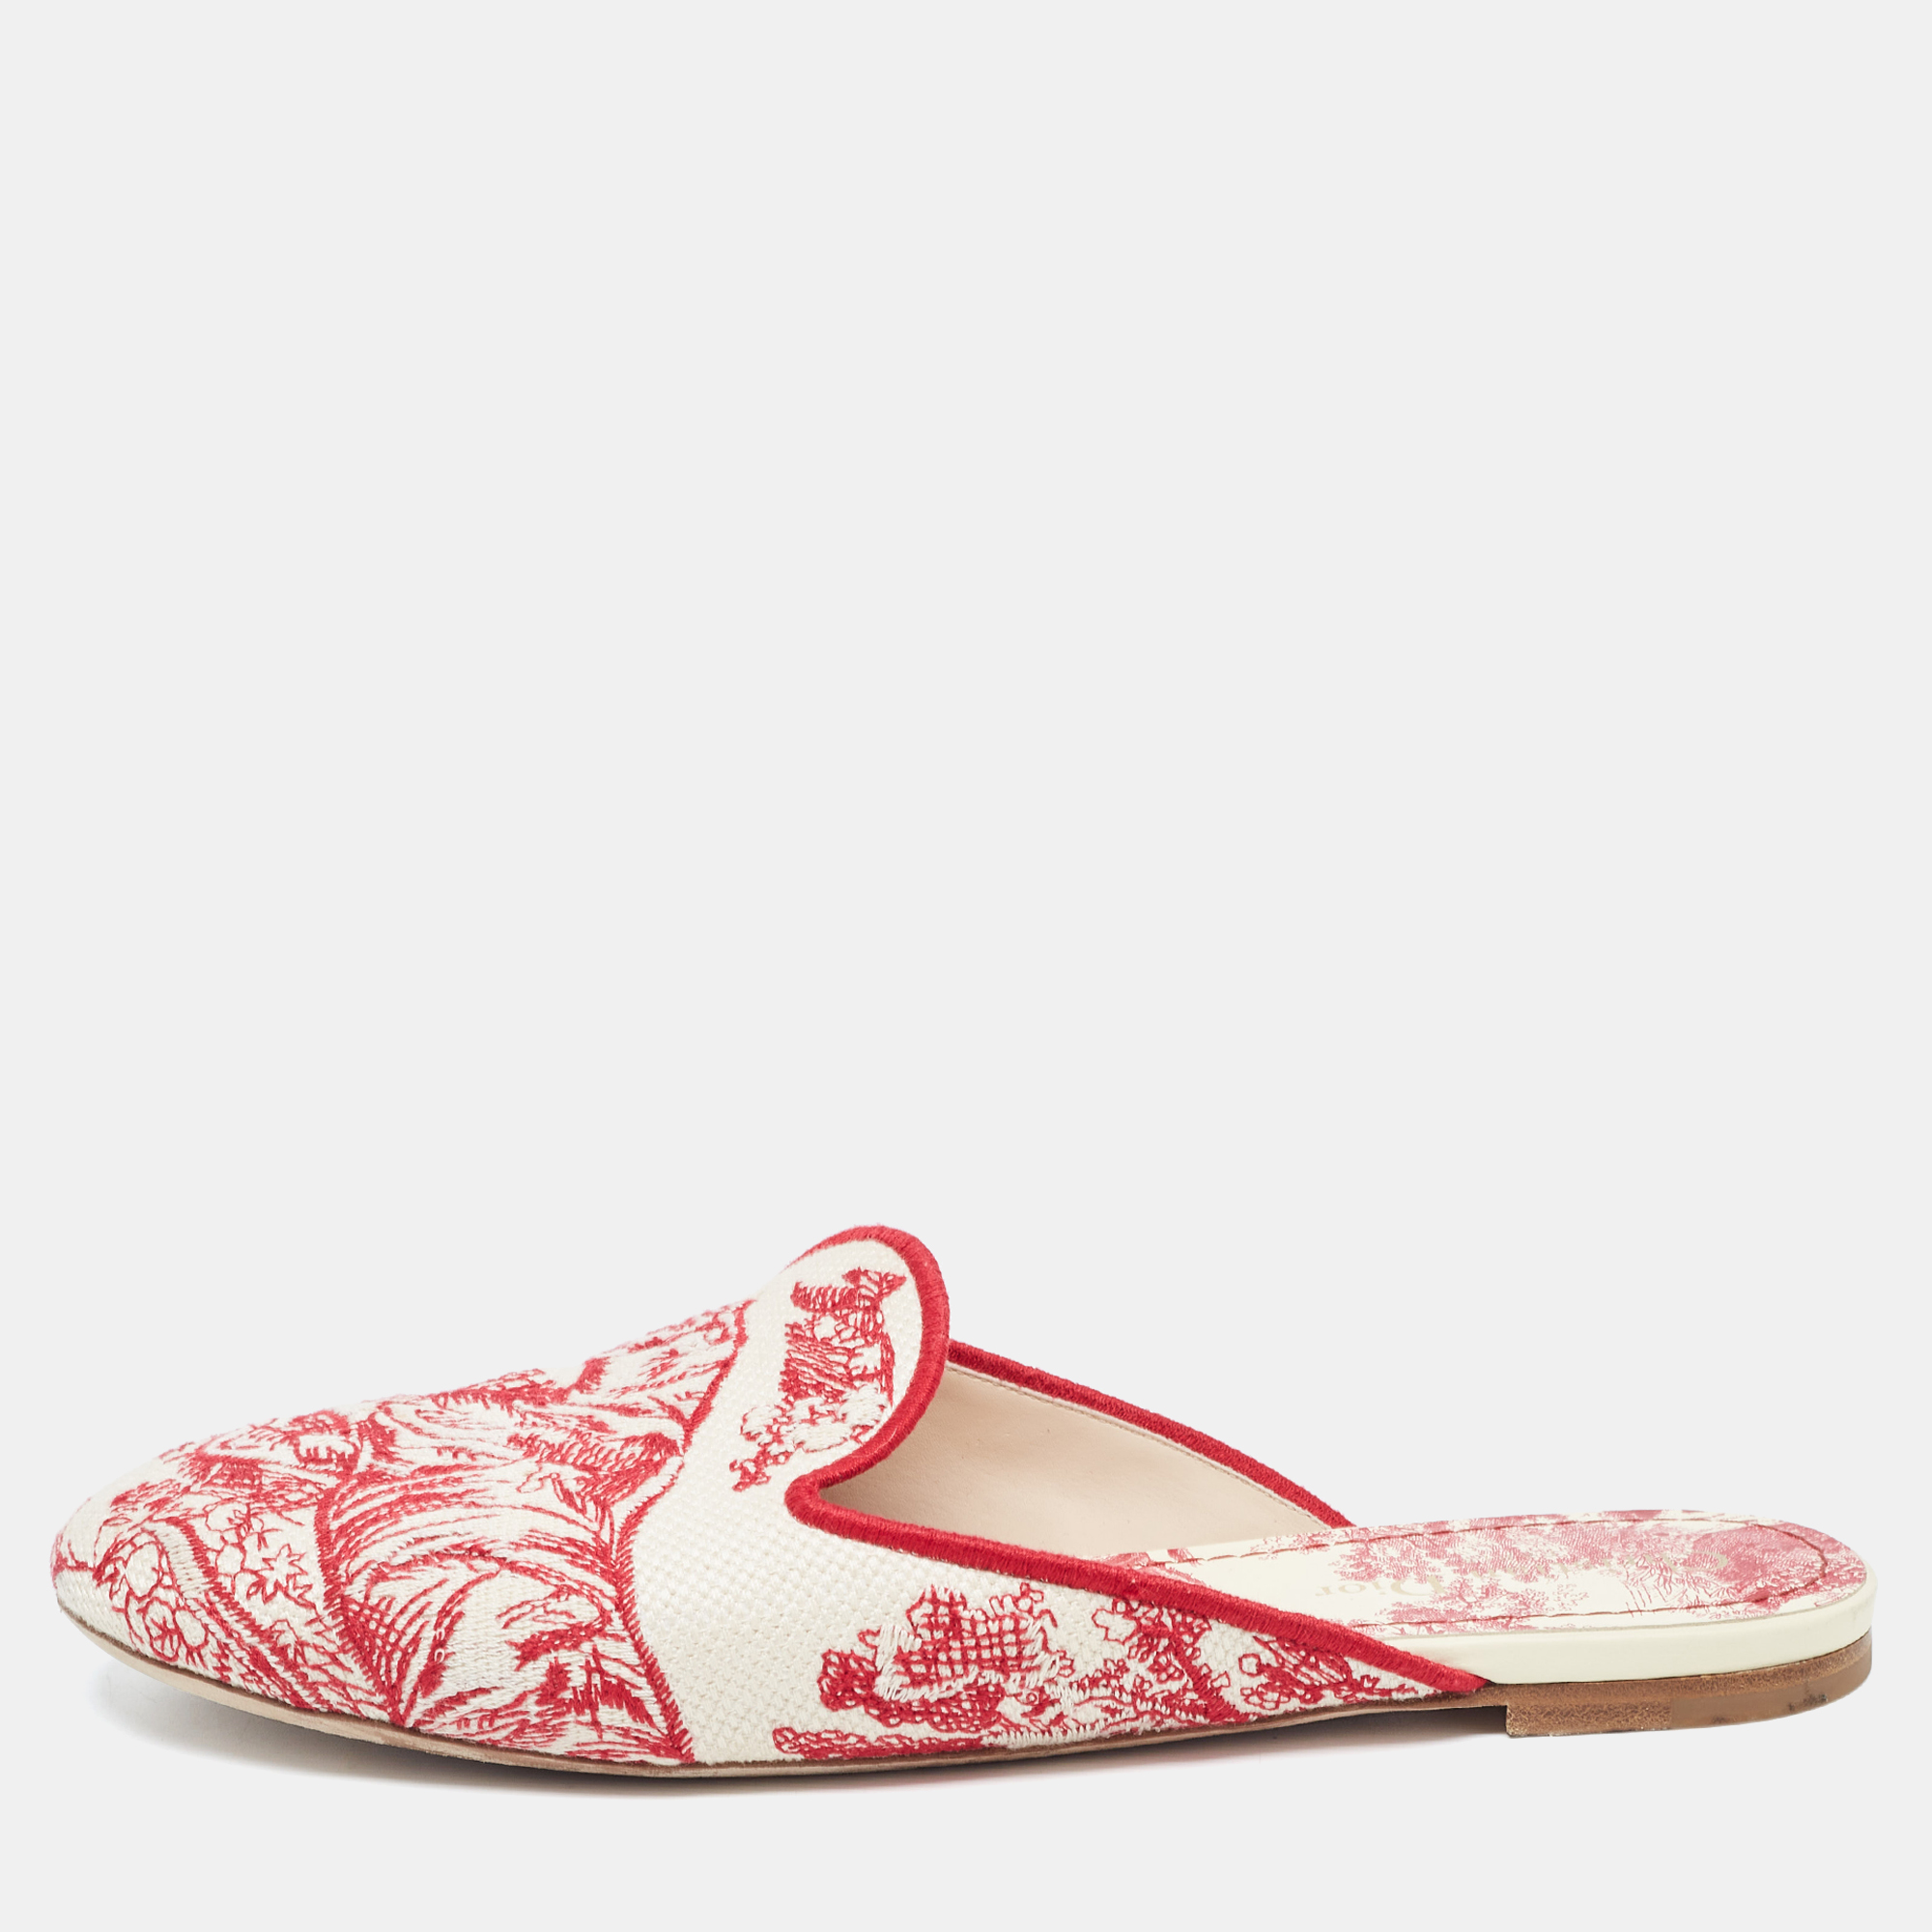 Dior Red/Beige Embroidered Canvas Toile De Jouy Flat Mules Size 41